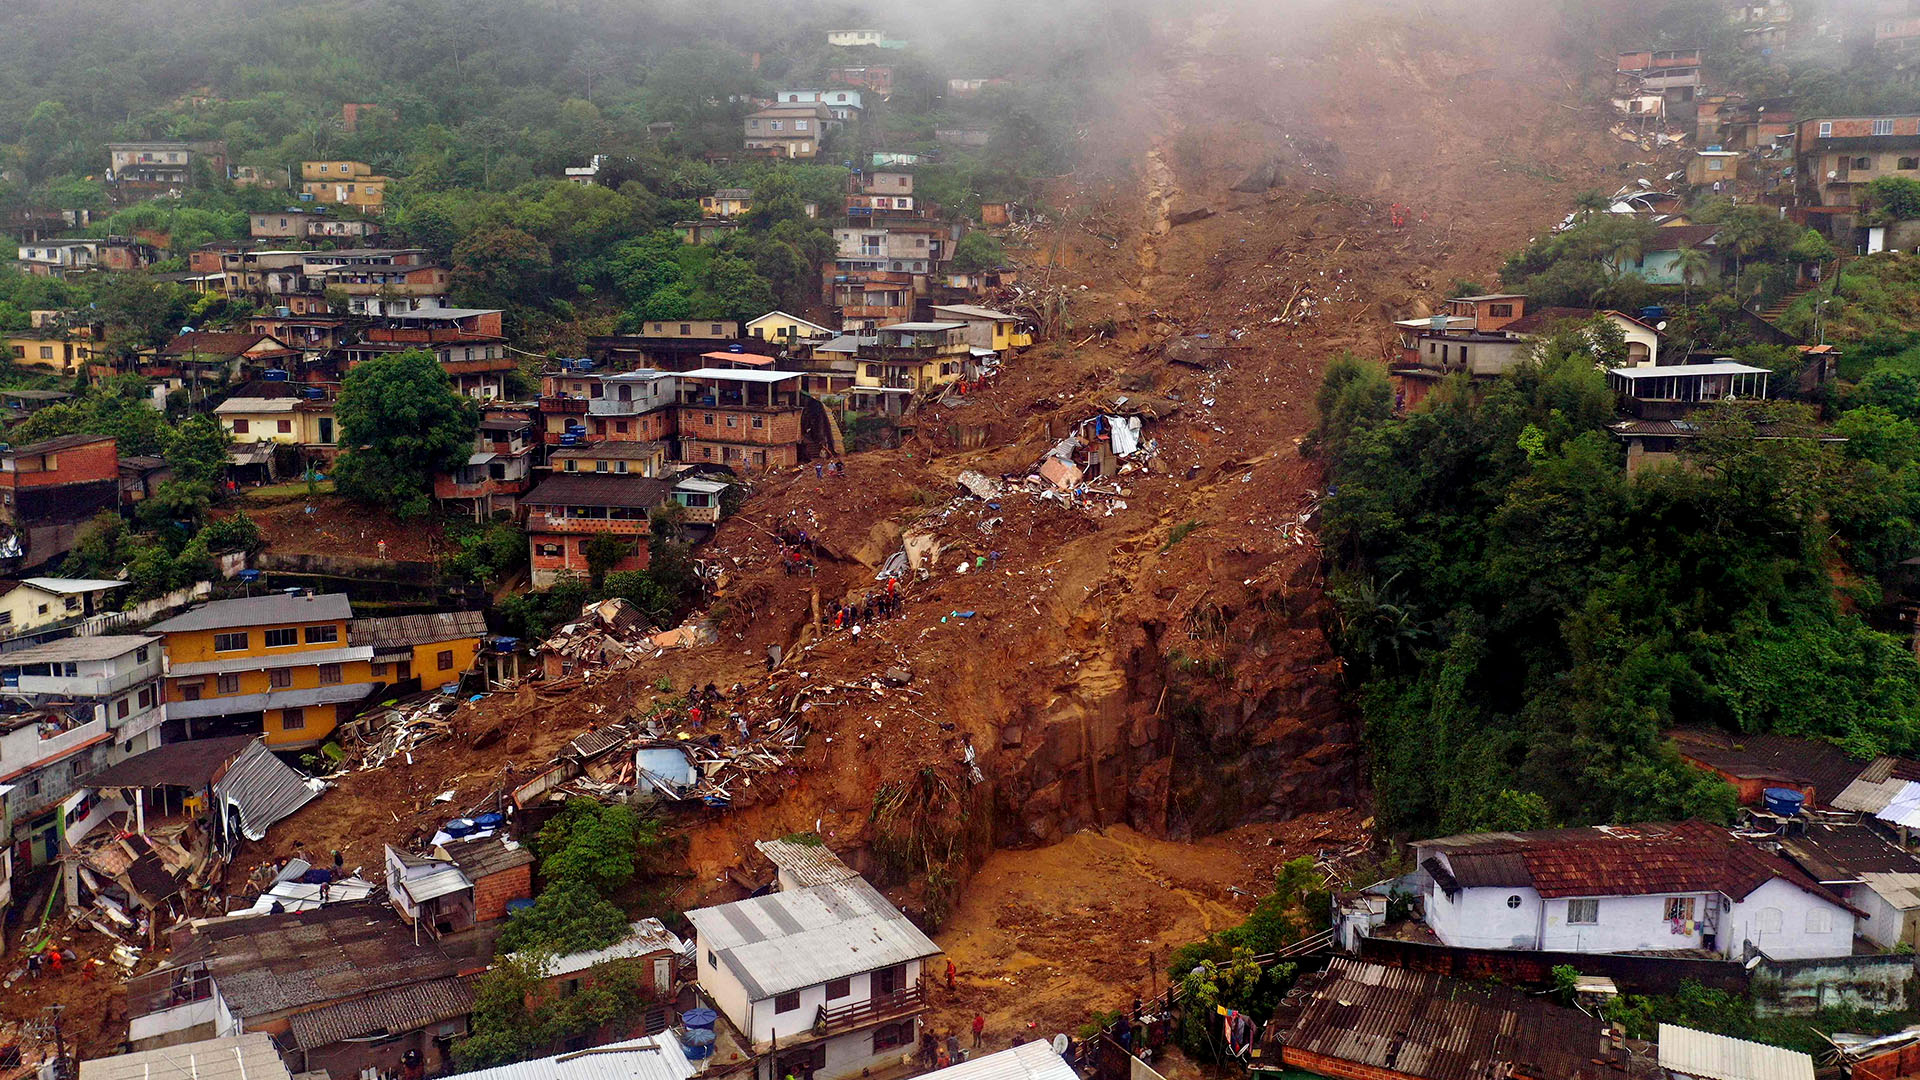 Petropolis, Brazil, hit by deadly floods and mudslides